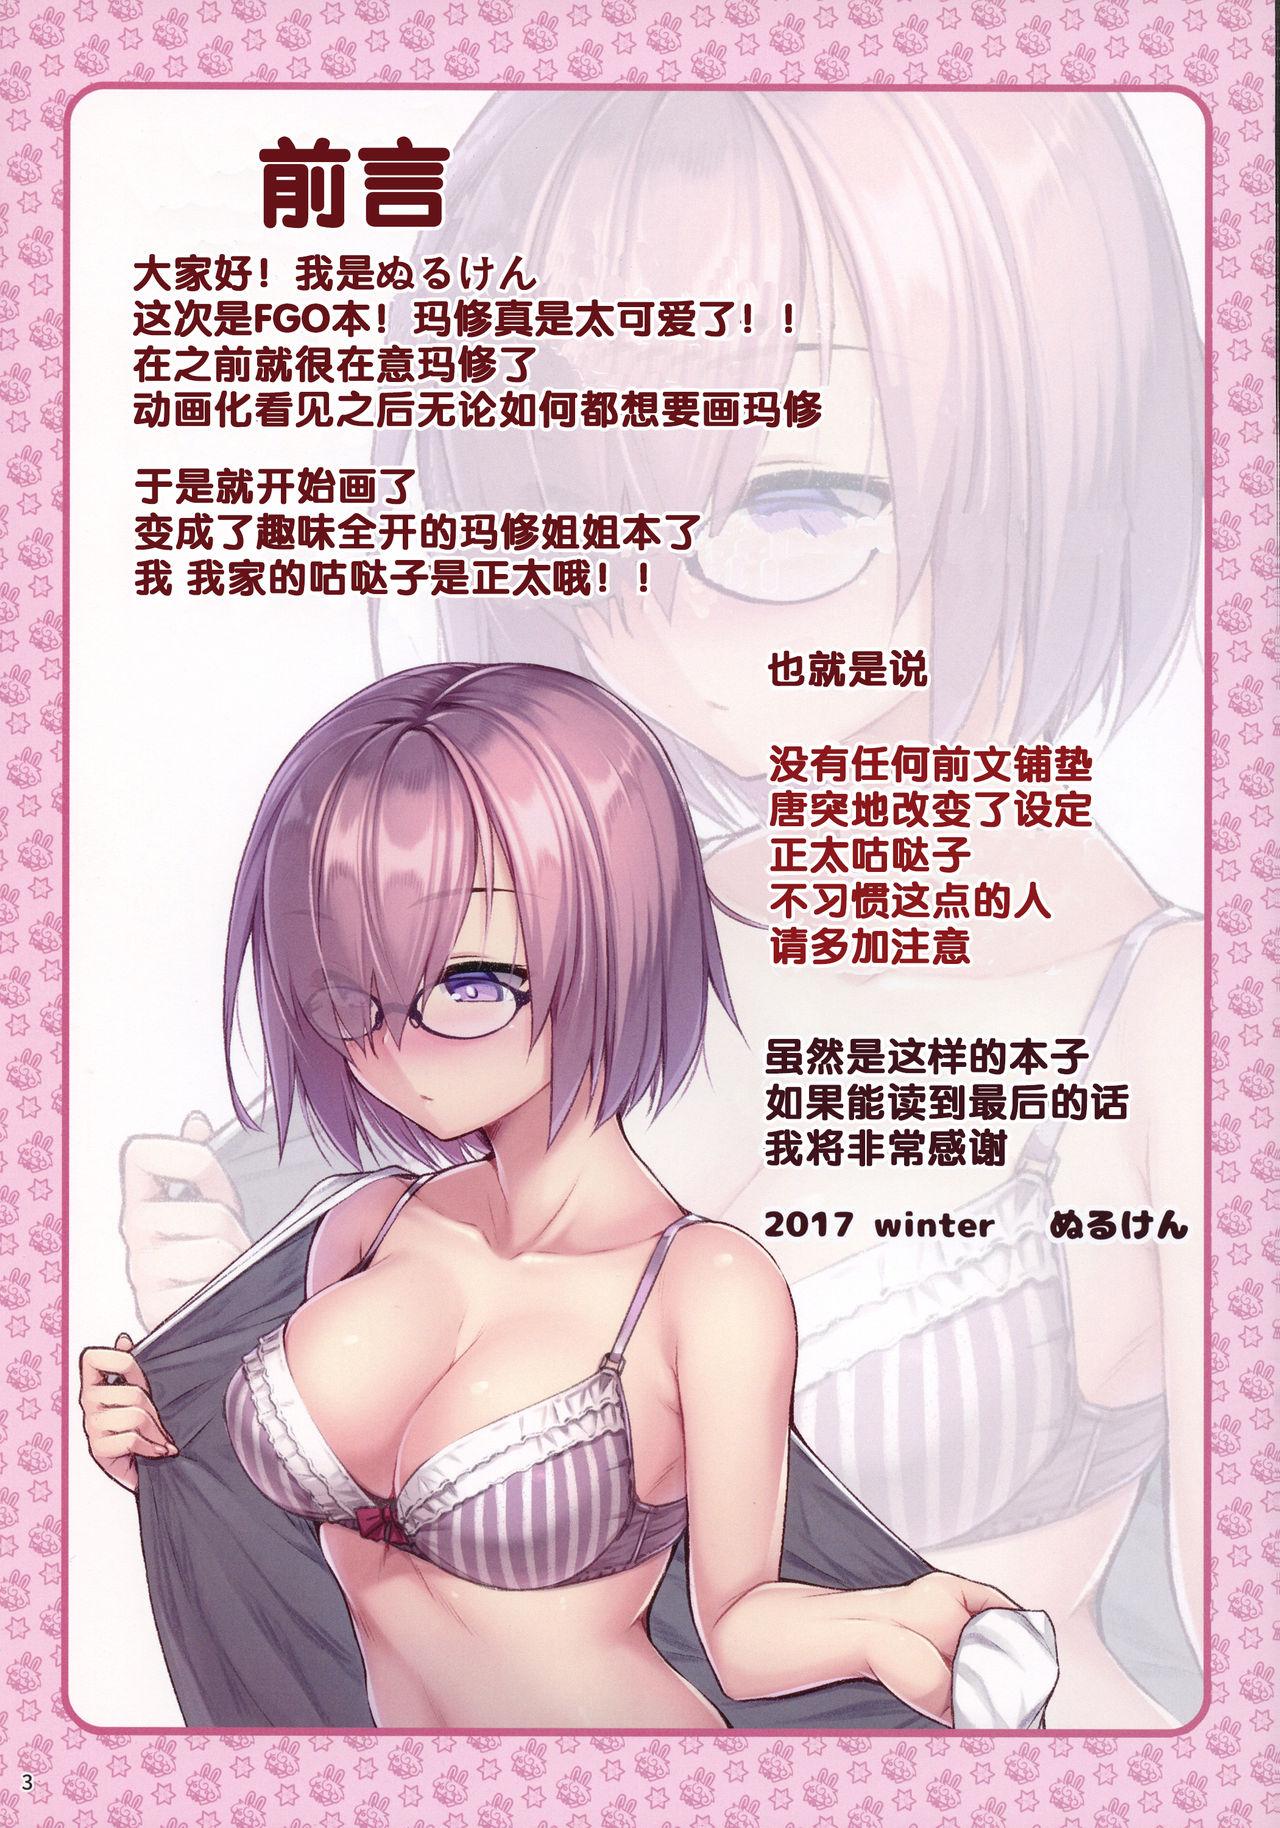 Sixtynine Mash Onee-chan to. - Fate grand order Suck Cock - Page 3